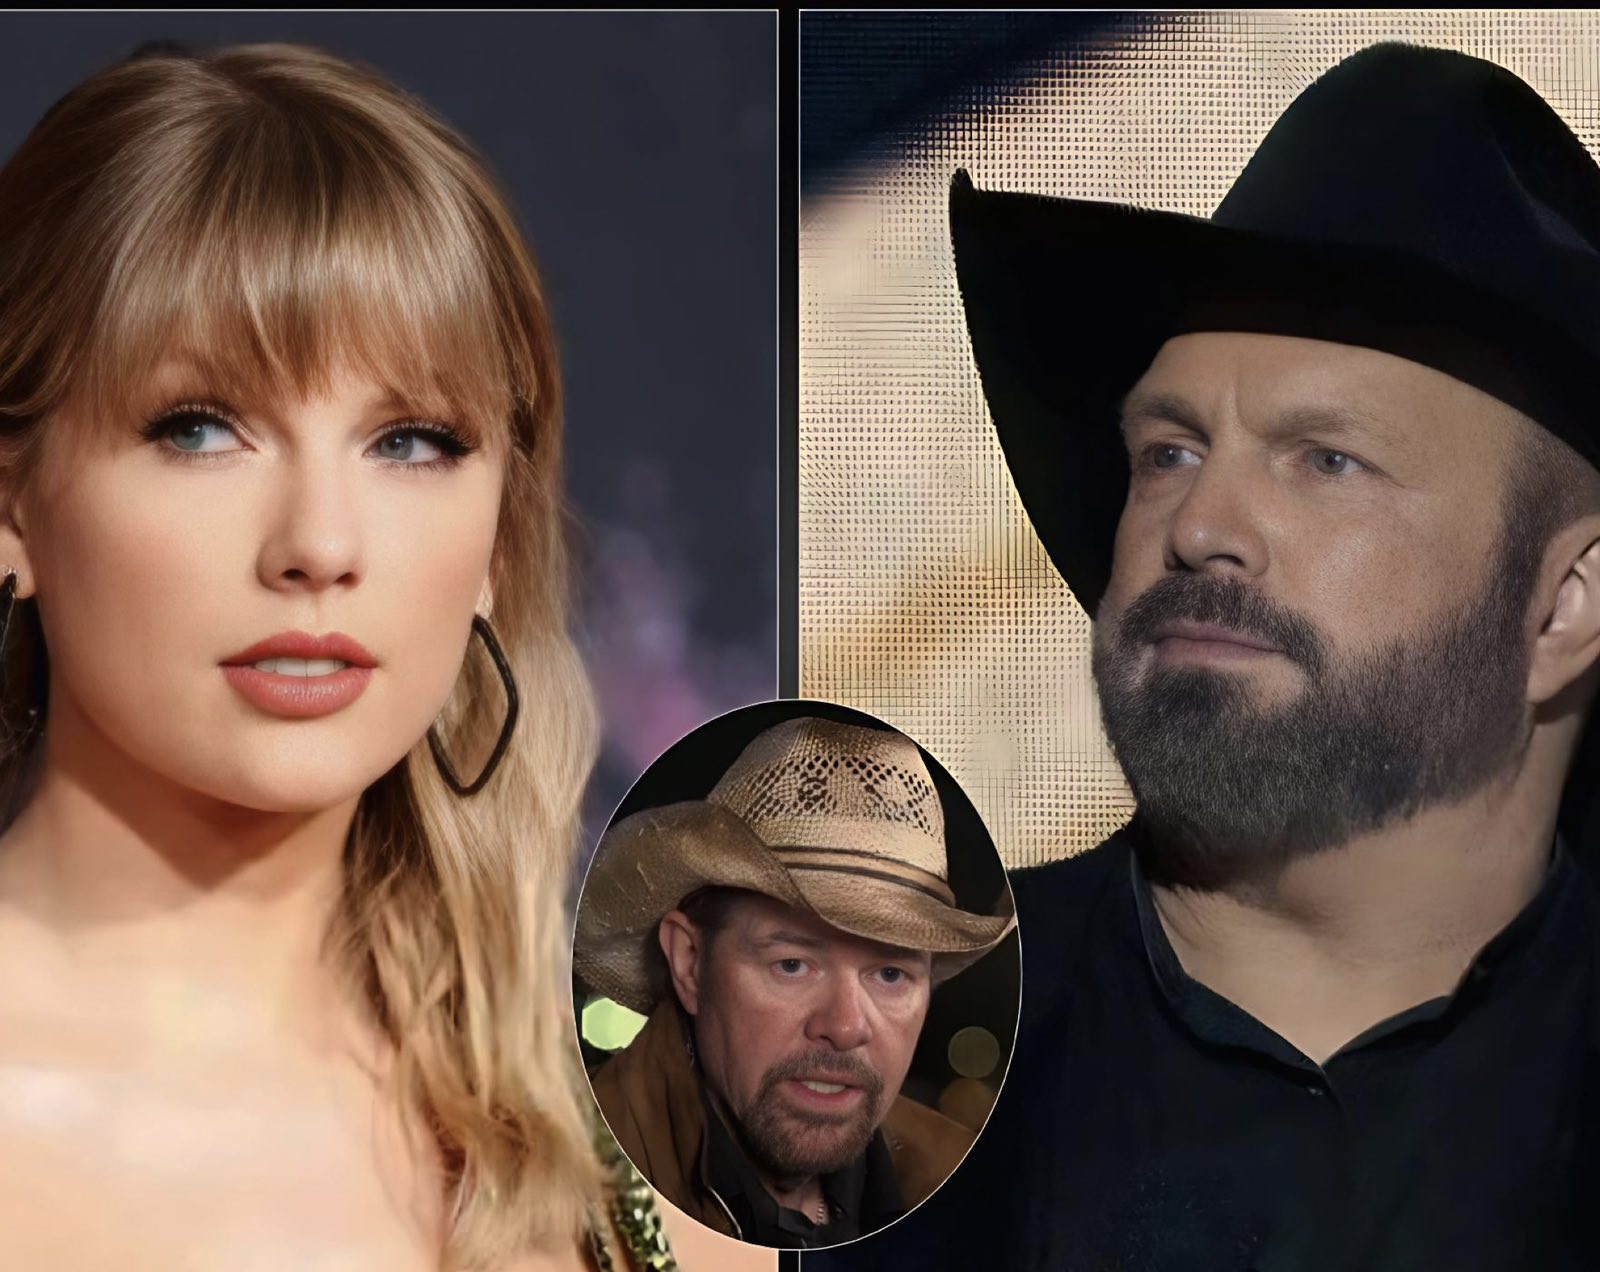 Garth Brooks and Taylor Swift were both rejected from participating in the Toby Keith tribute concert.